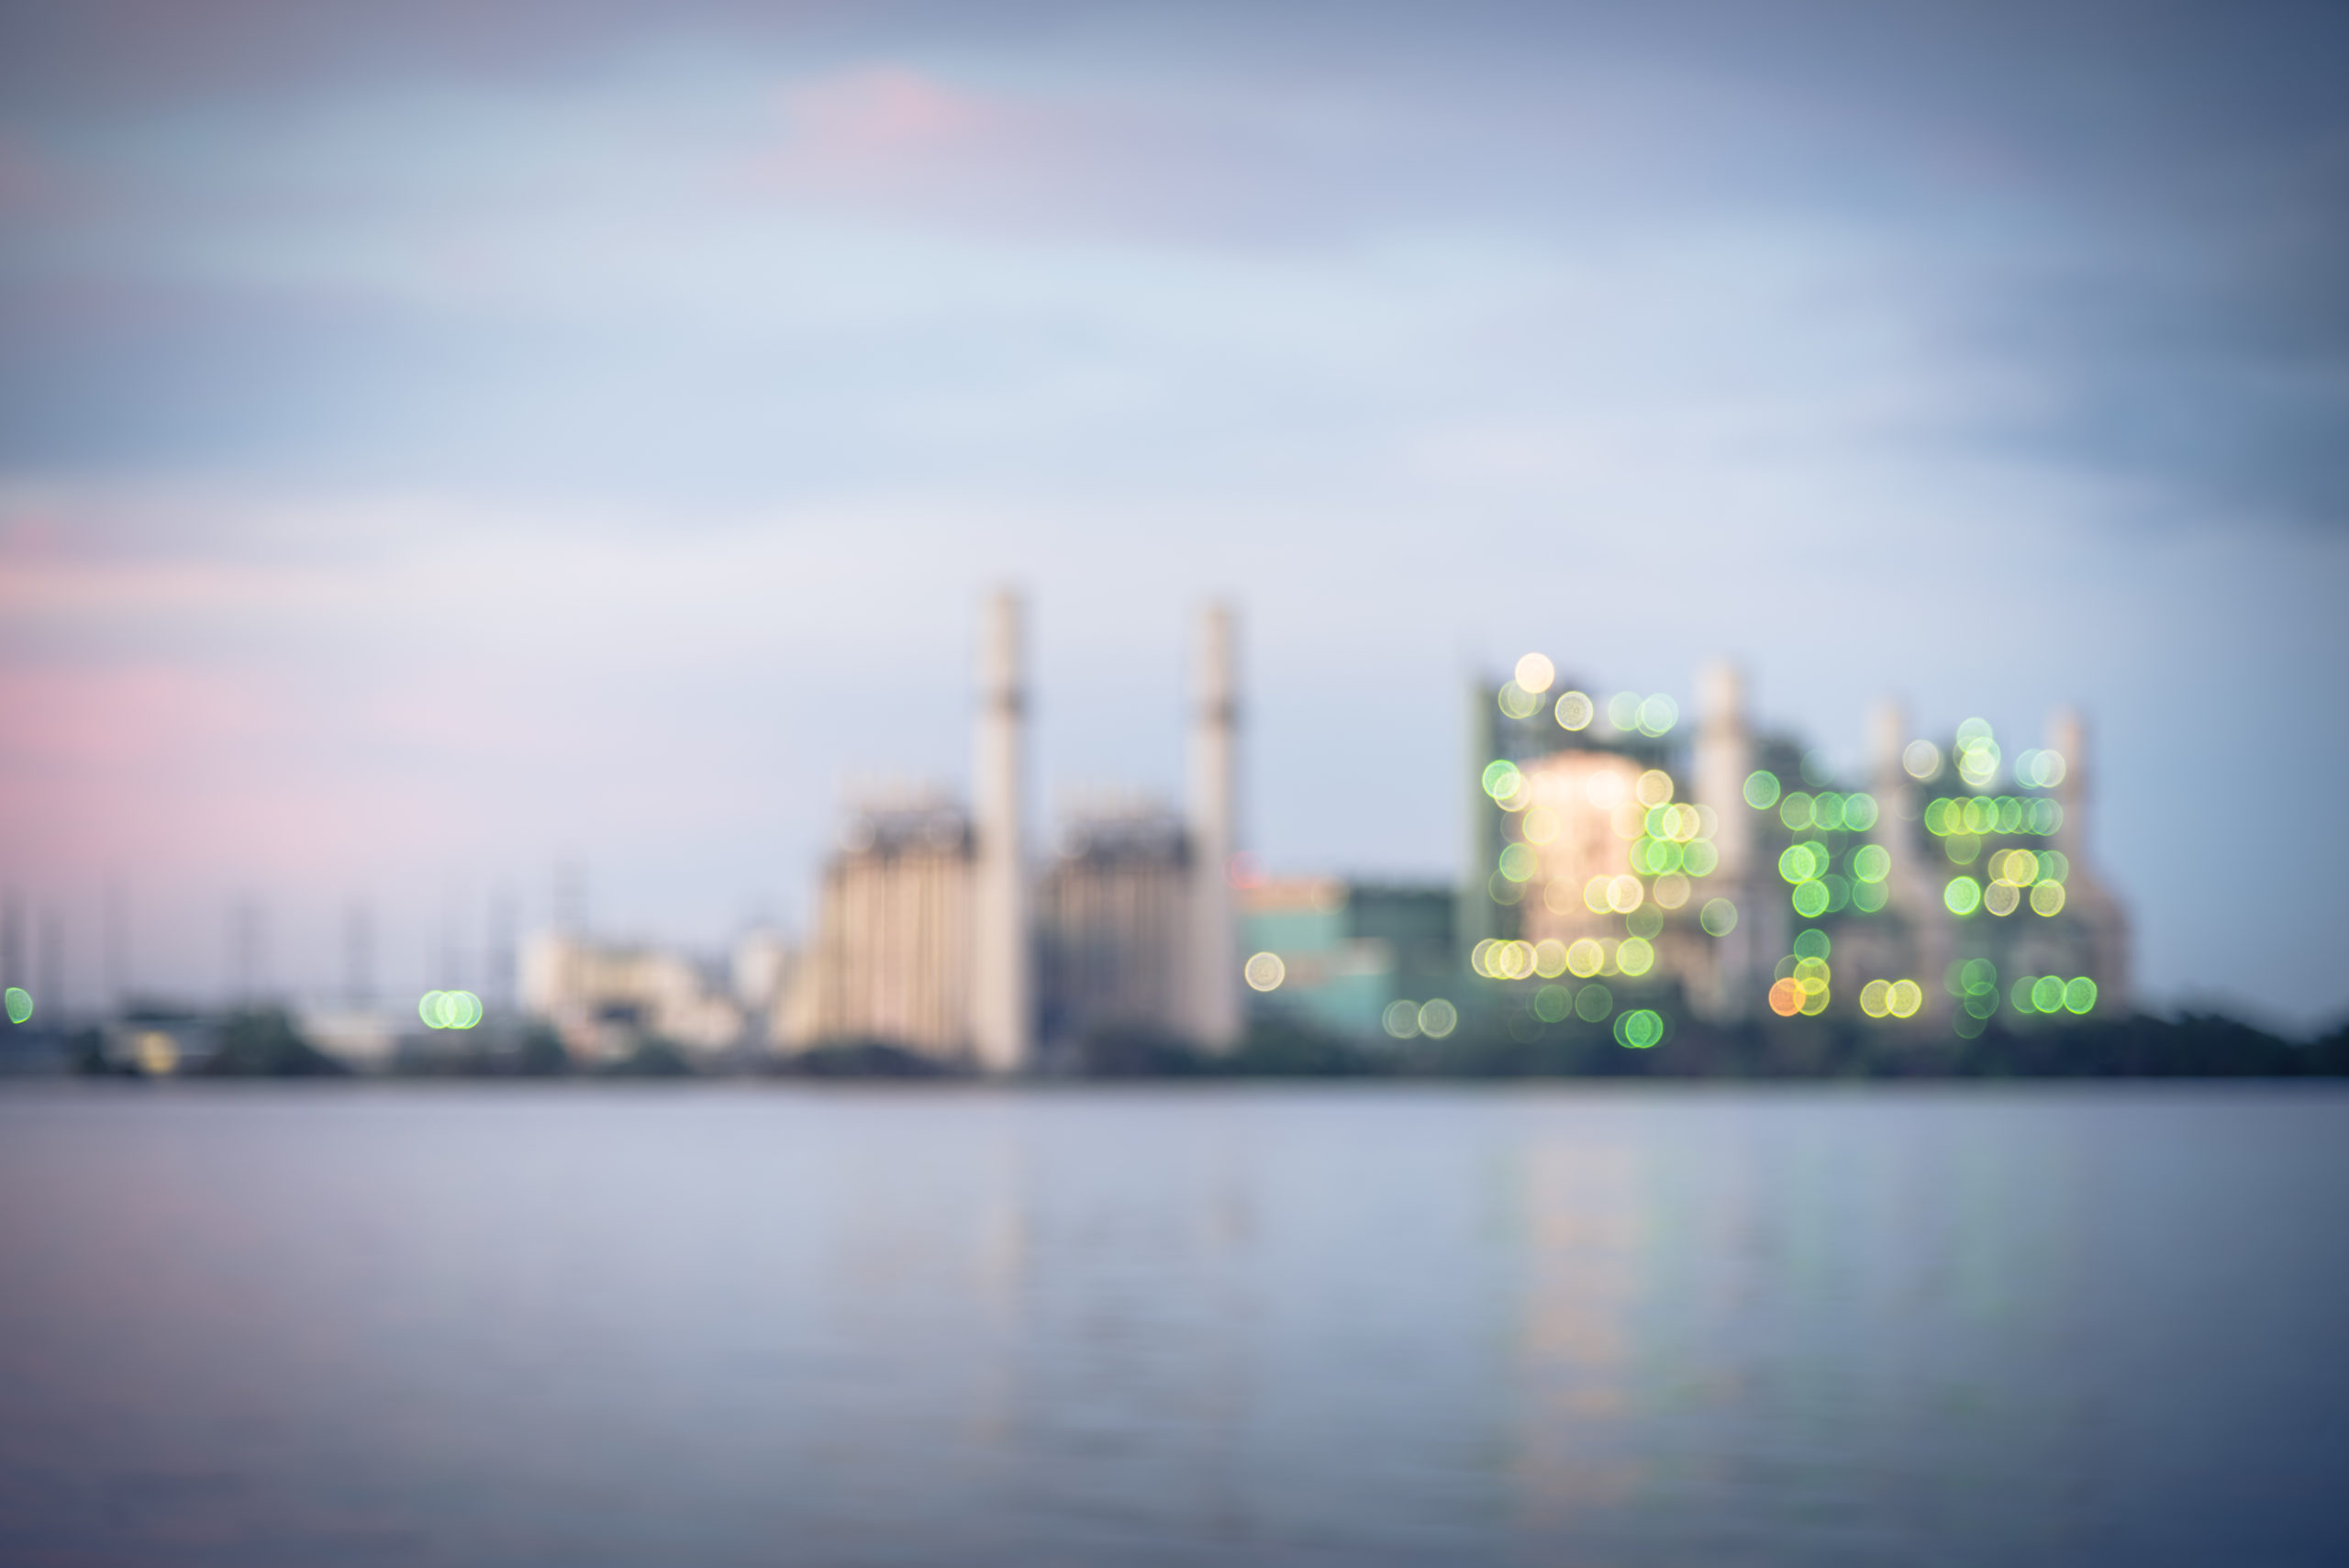 A deliberately blurry photo of a coal power plant in San Antonio, Texas, with a cooling pond in front of it. The coal plant is shot at dusk with a moody vignette filter.